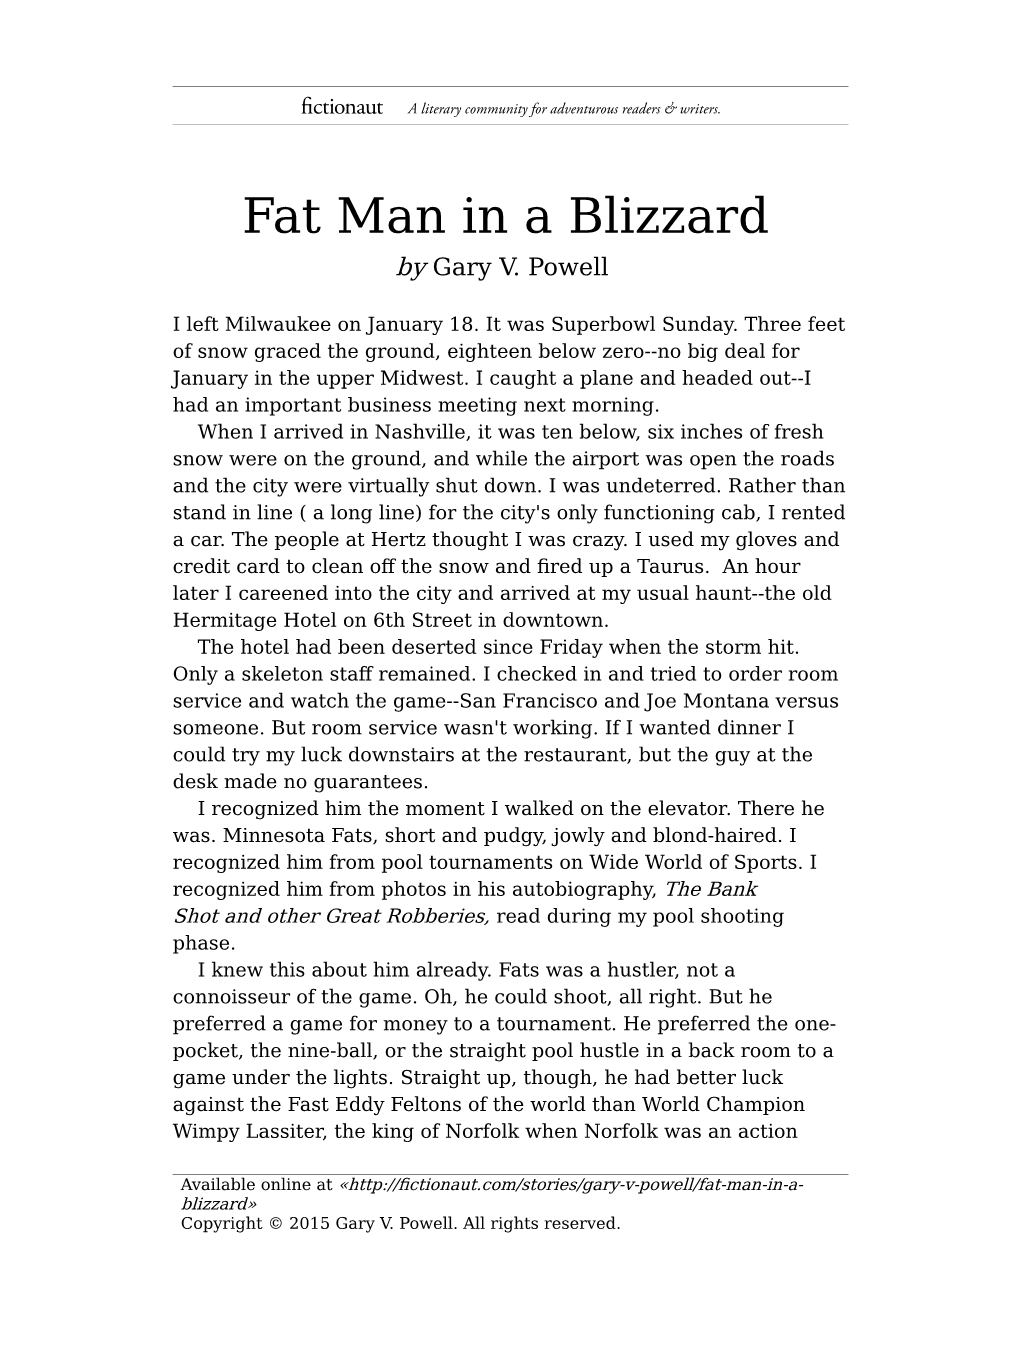 Fat Man in a Blizzard by Gary V